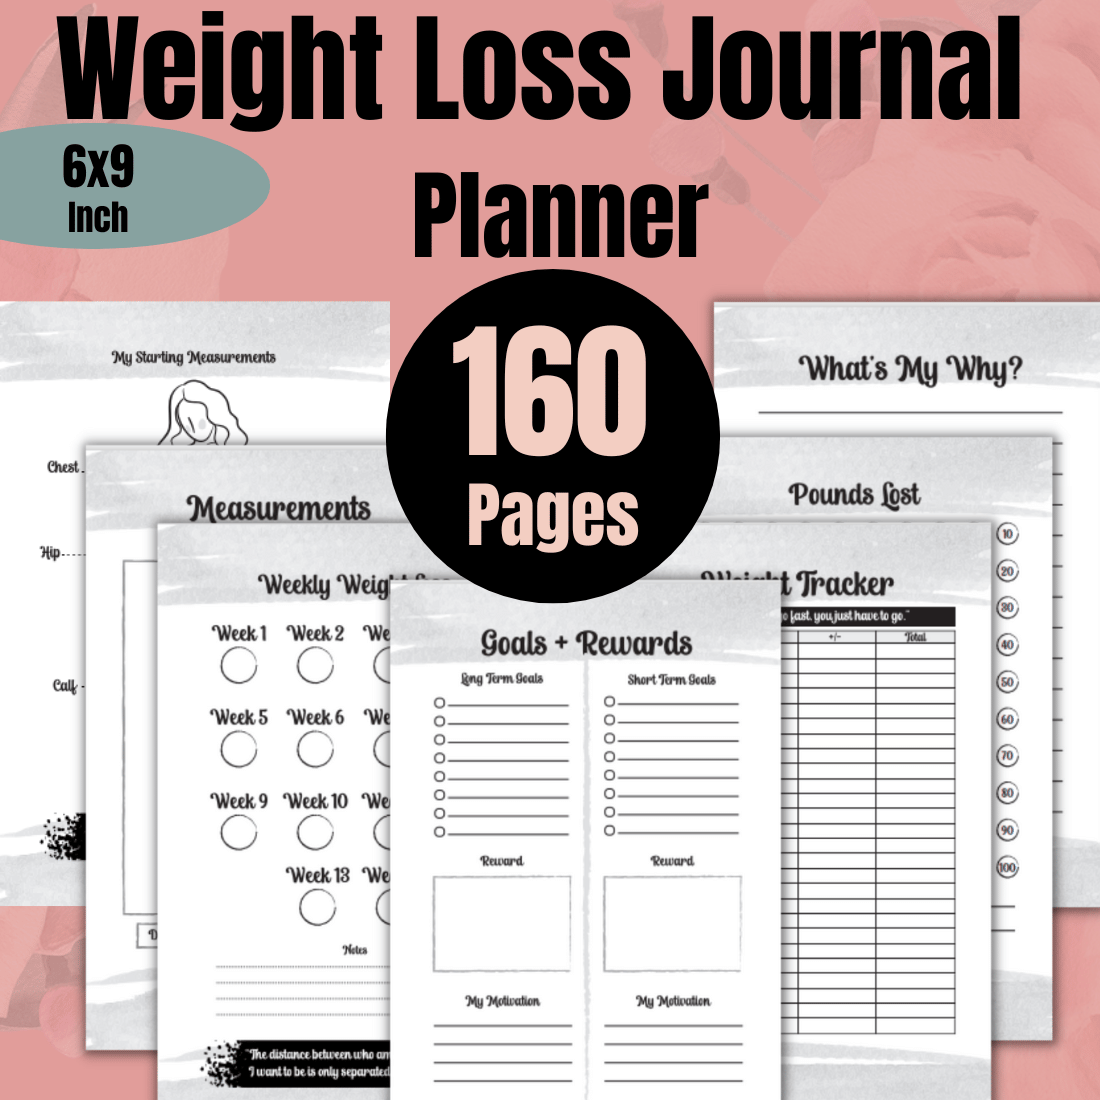 Weight Loss Journal Planner main cover.